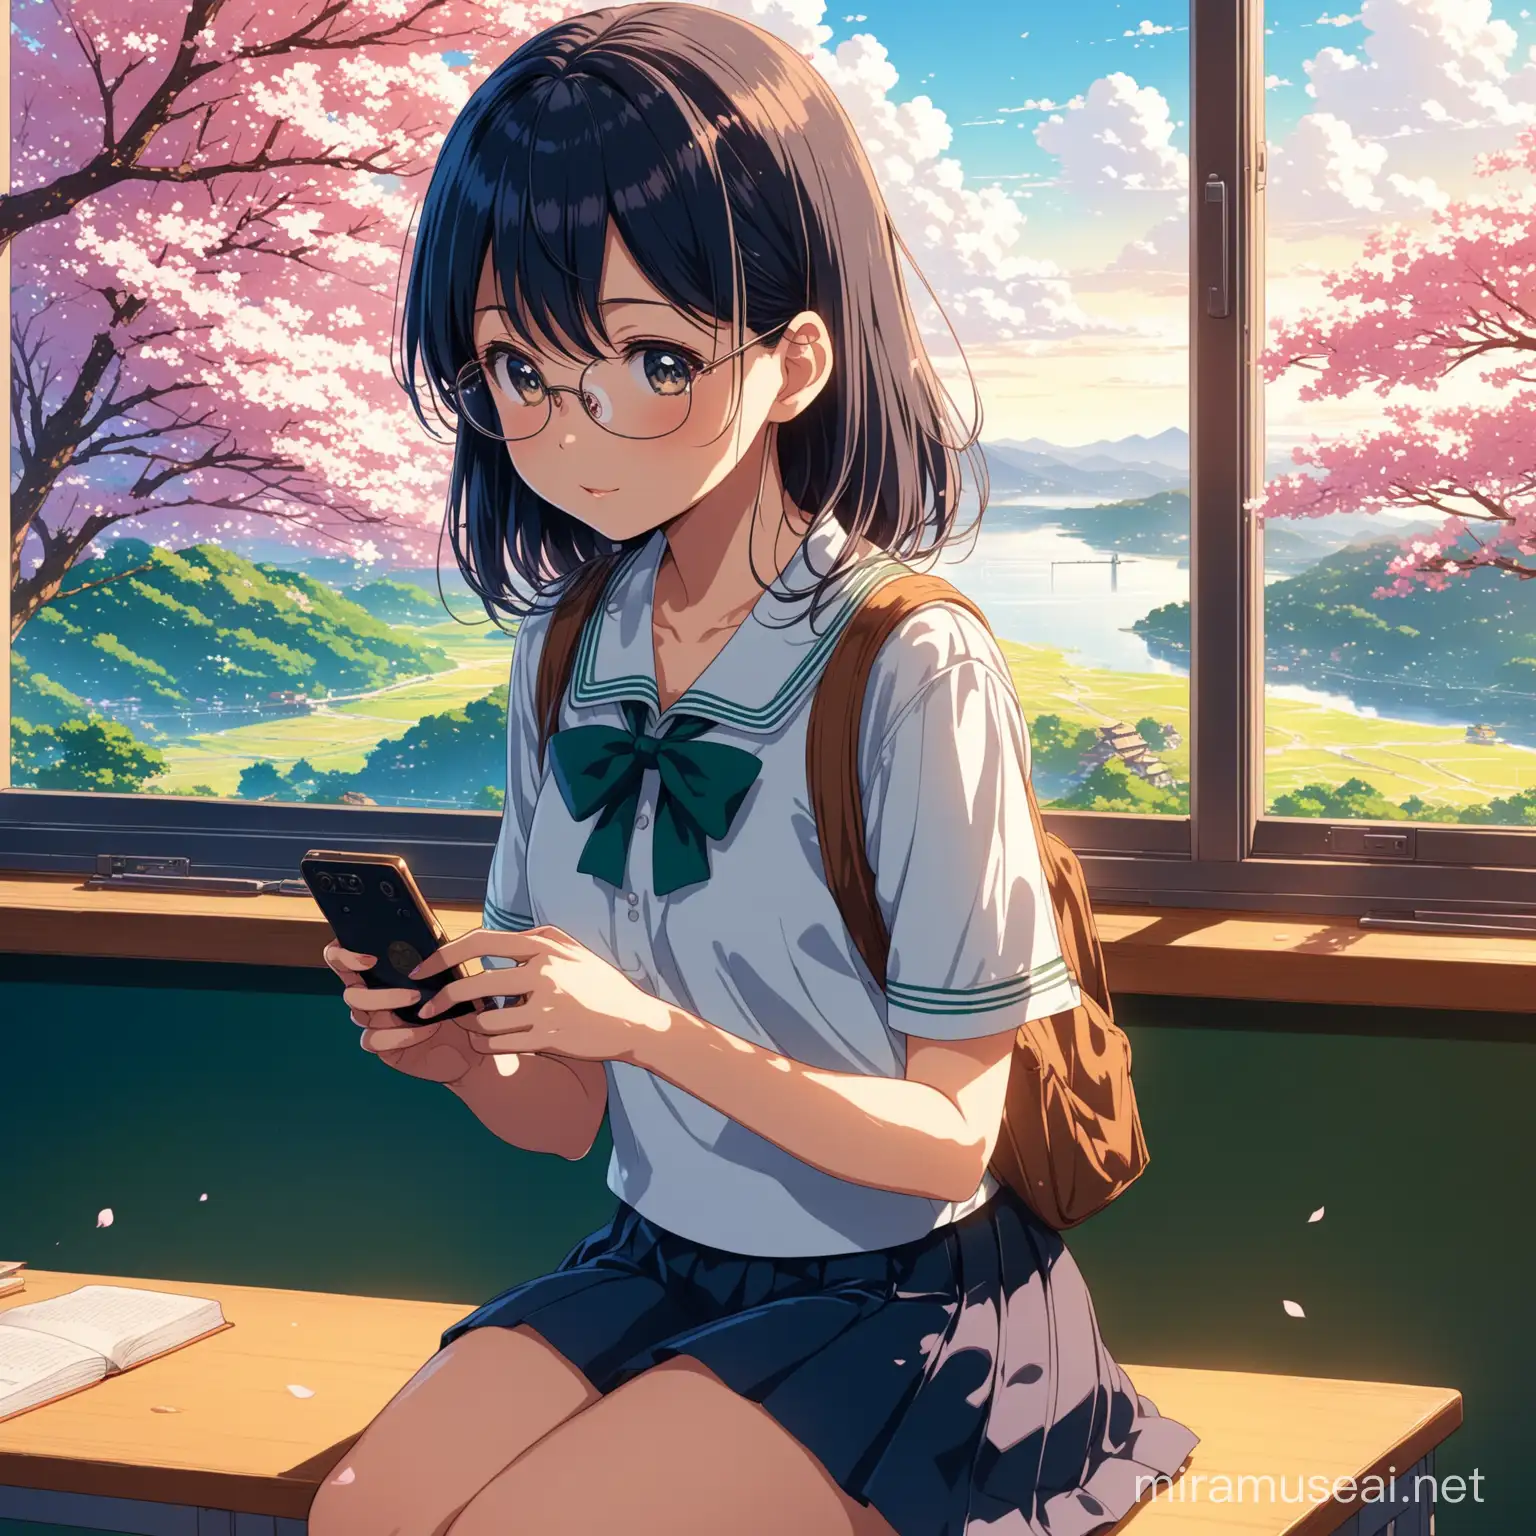 Cherry Blossom Schoolgirl Texting by the Window in Kyoto Animation Style